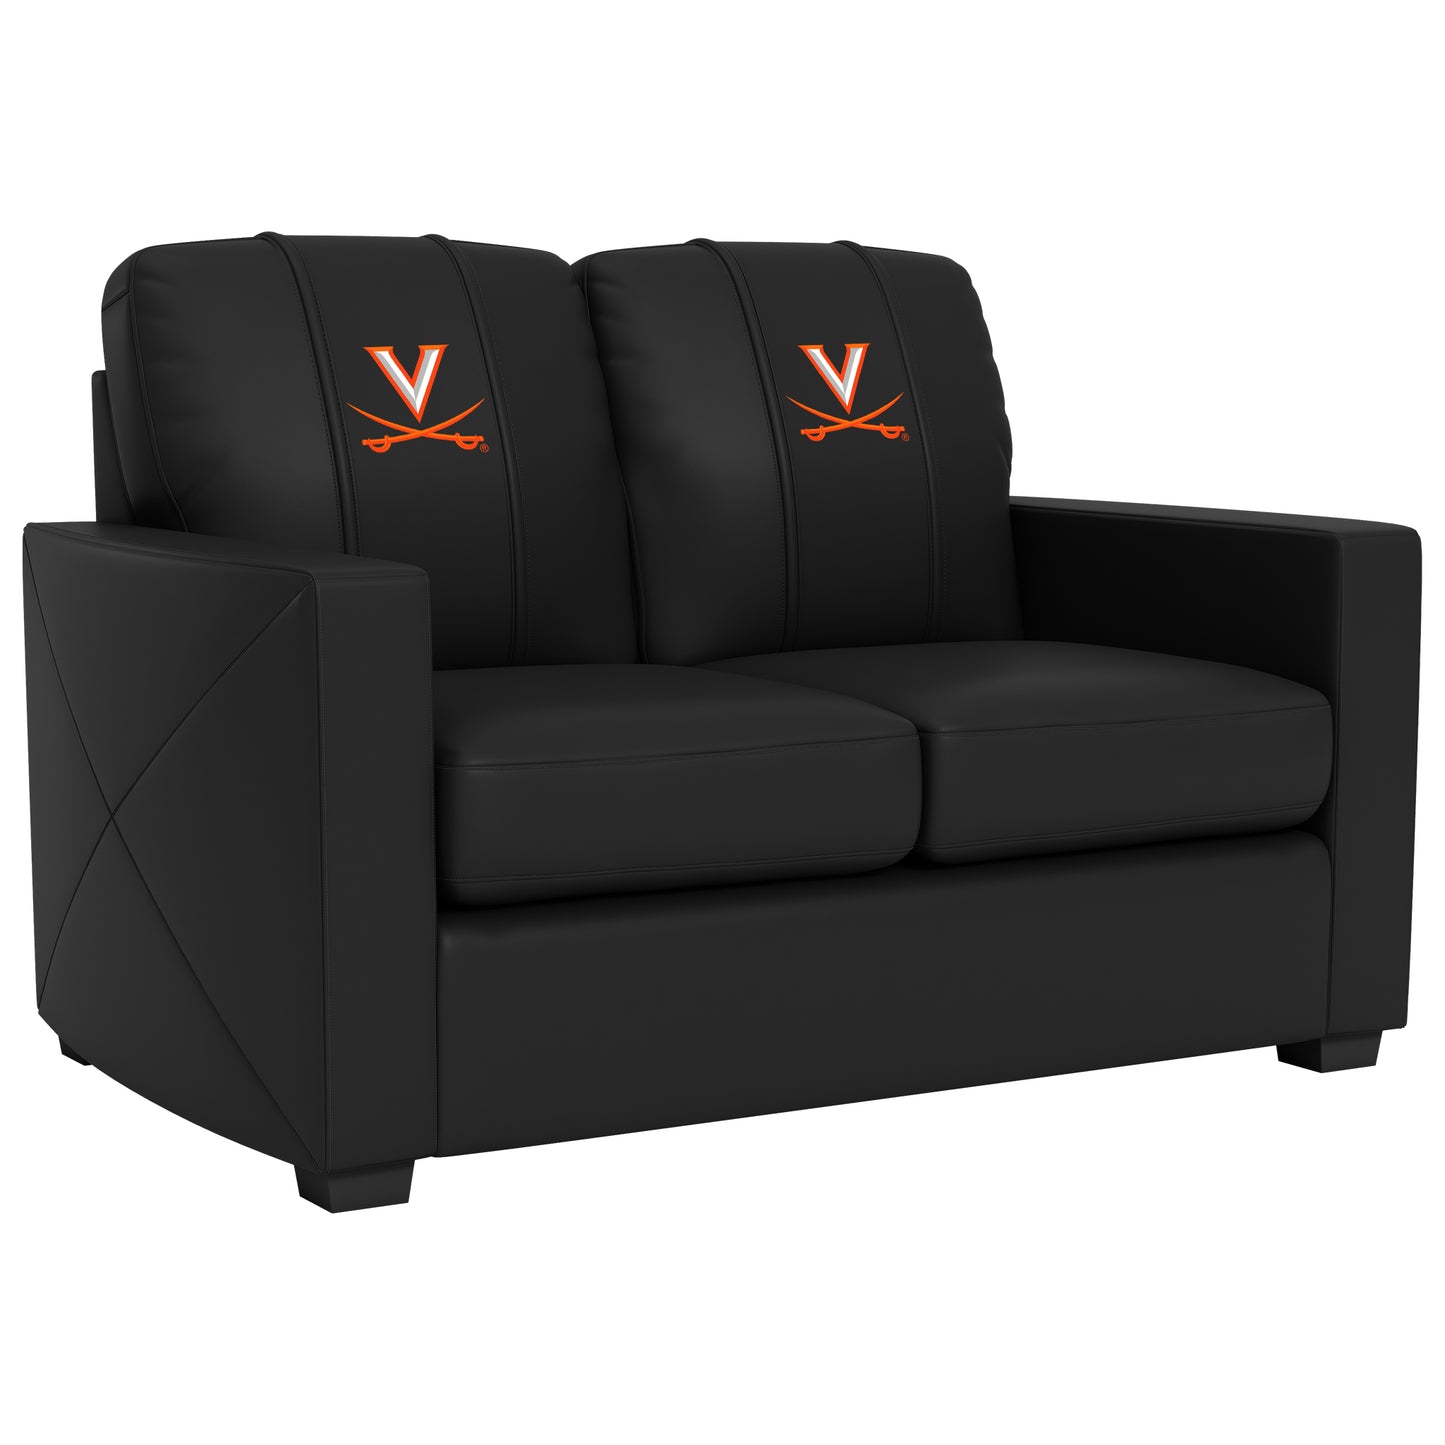 Silver Loveseat with Virginia Cavaliers Primary Logo